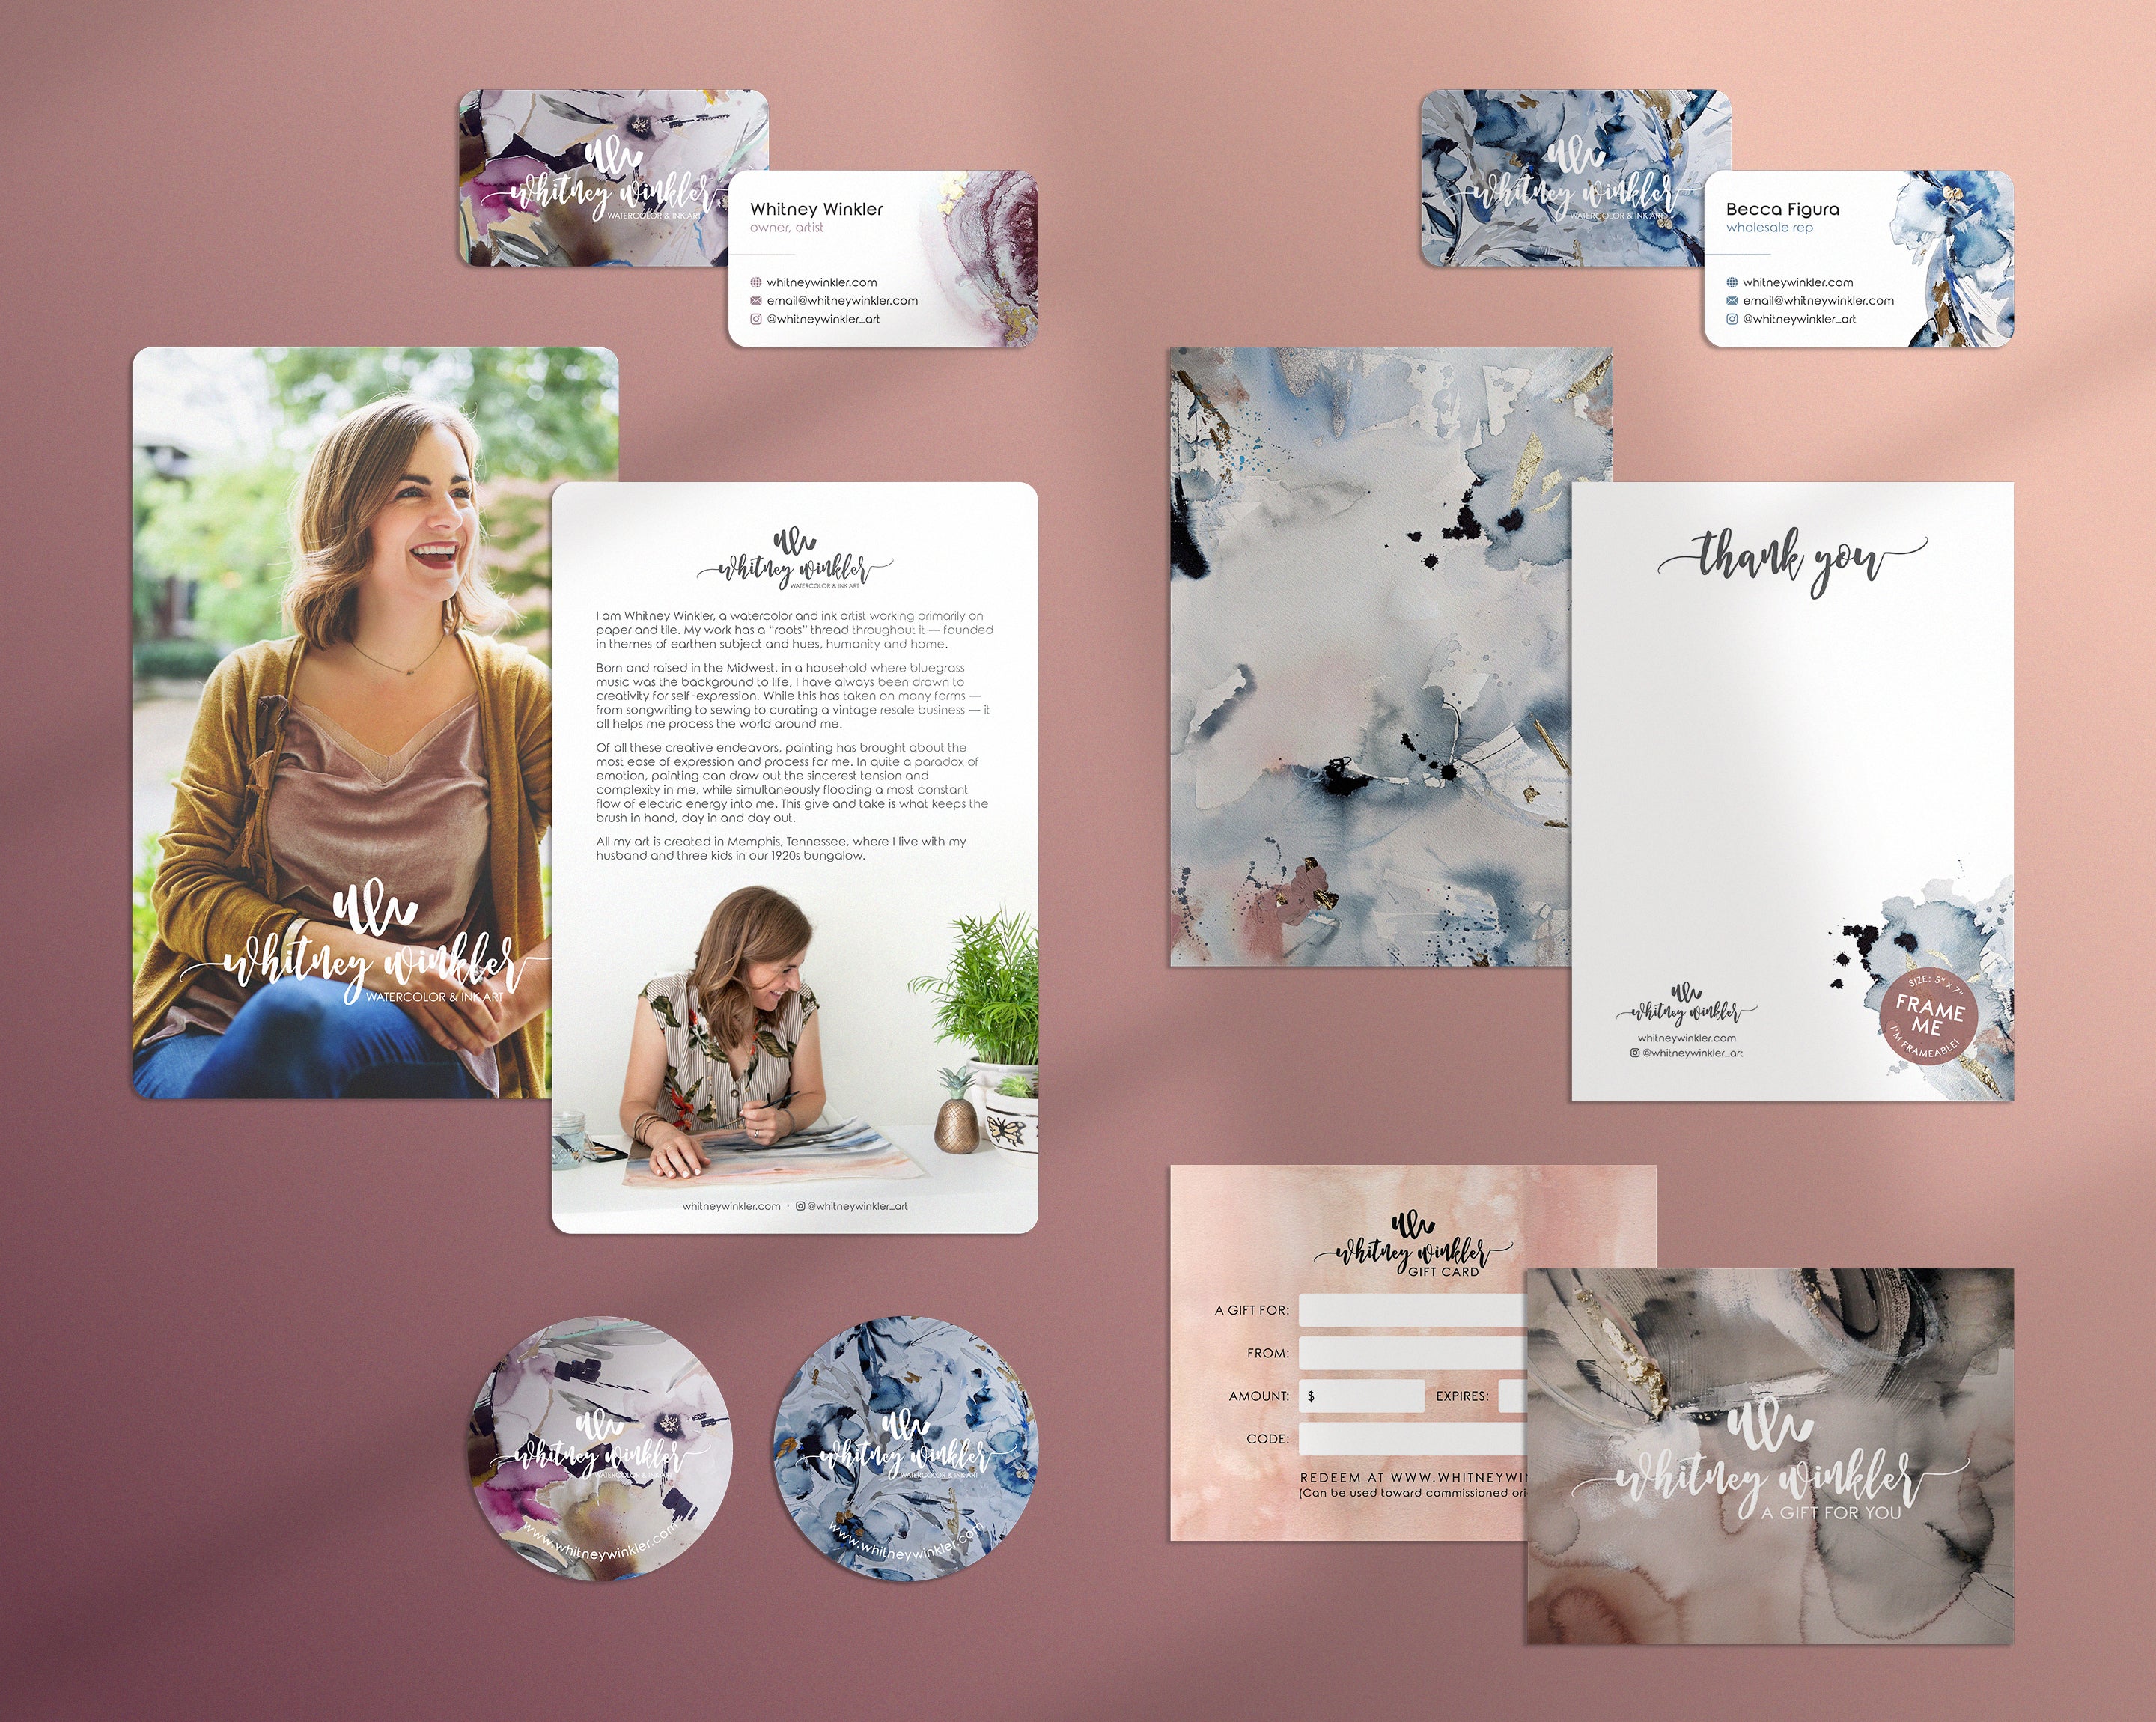 branding collateral design for watercolor artist: business cards, logo stickers, about postcards, gift card design, thank you notecards